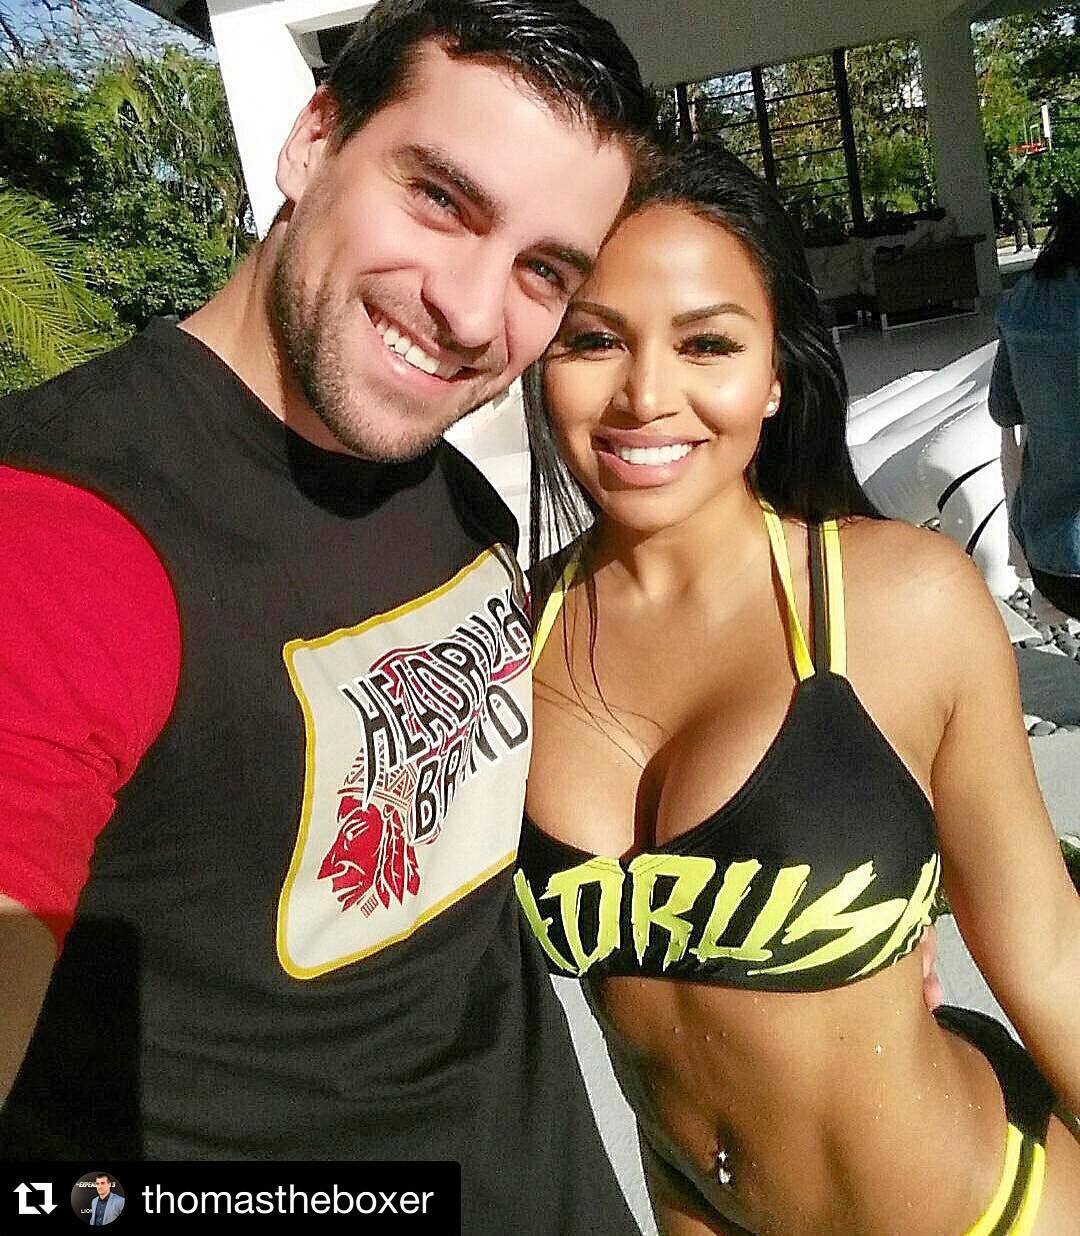 #Repost @thomastheboxer ・・・ Amazing day filming with fitness model Dolly Castro.